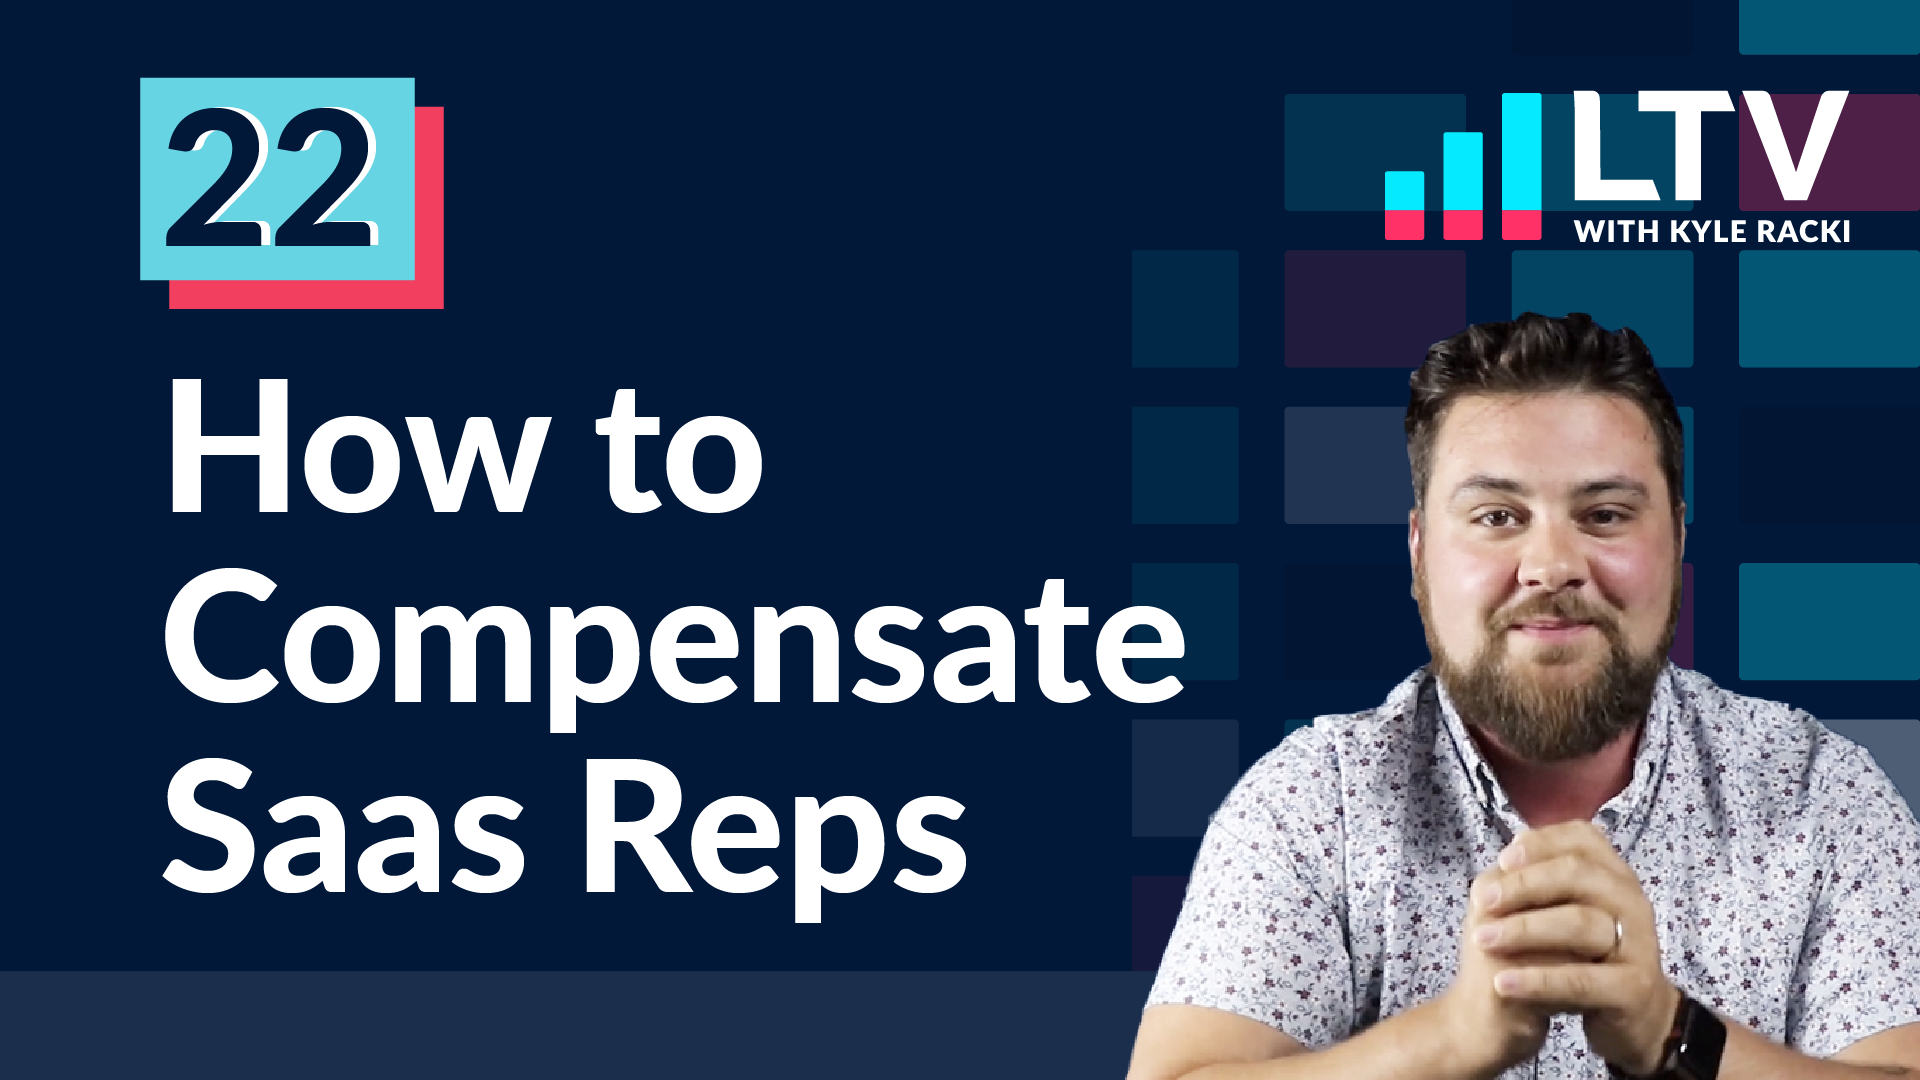 LTV Podcast Episode 22: How to Compensate Saas Reps